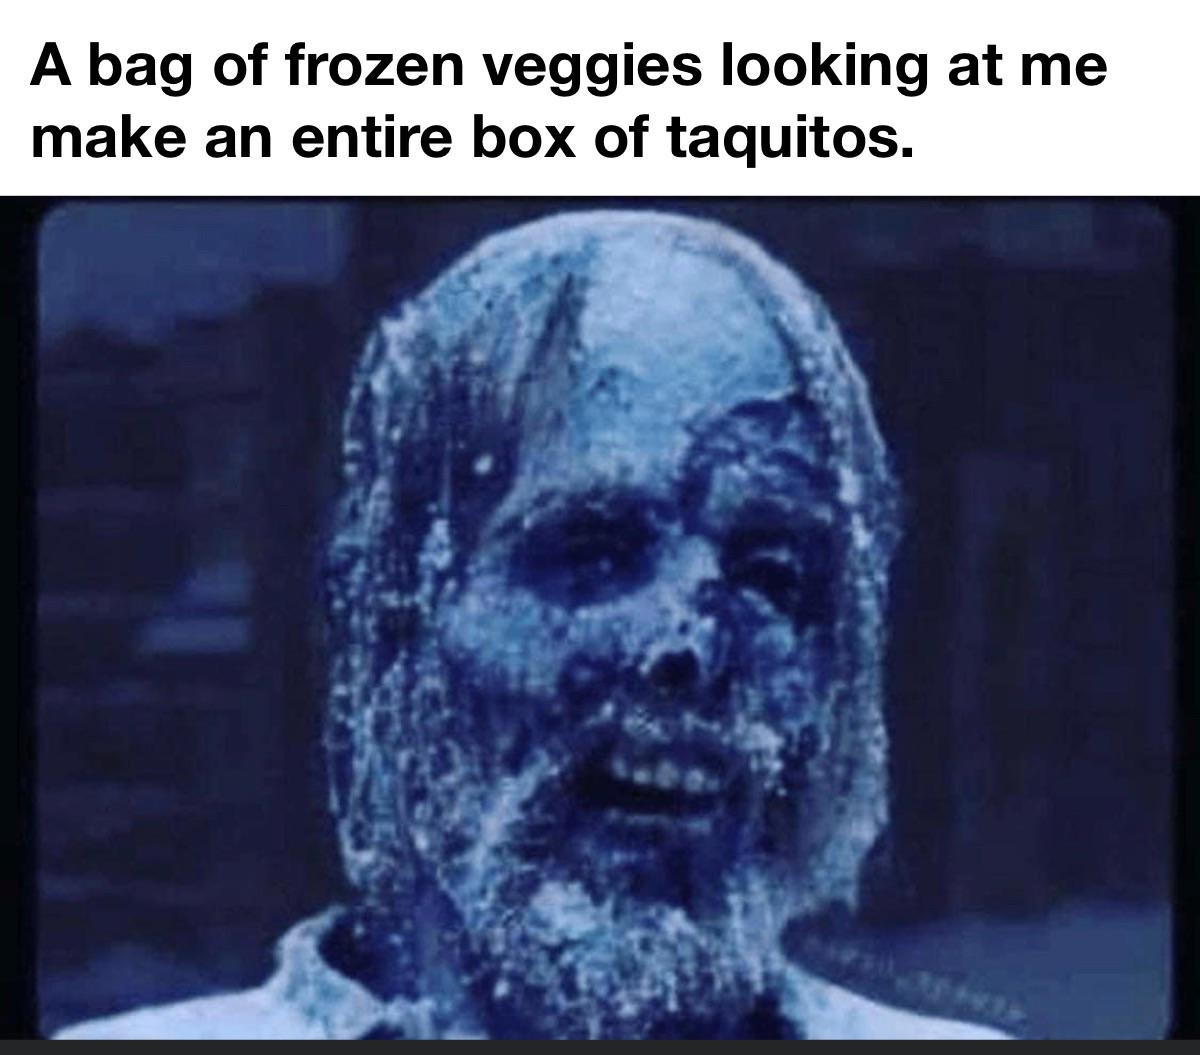 funny memes - cauliflower rice in the back of my freezer - A bag of frozen veggies looking at me make an entire box of taquitos.